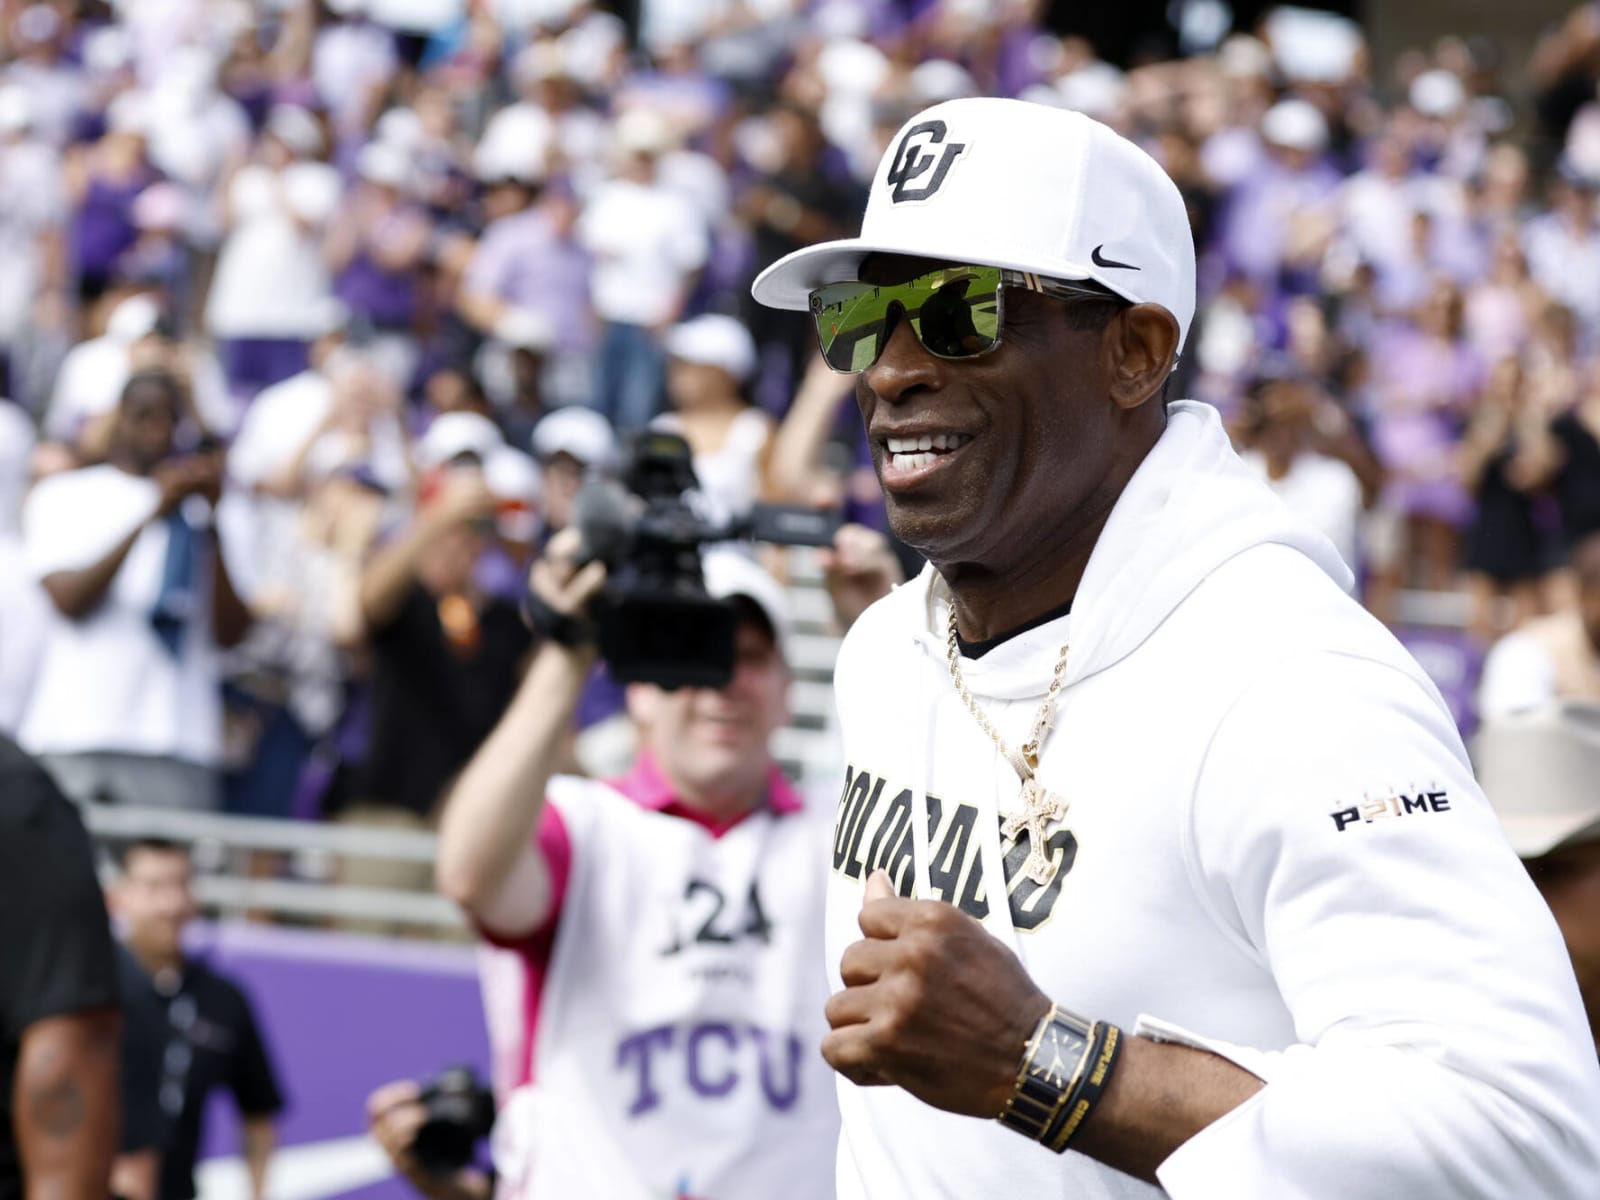 Deion Sanders reveals which player is future No. 1 draft pick